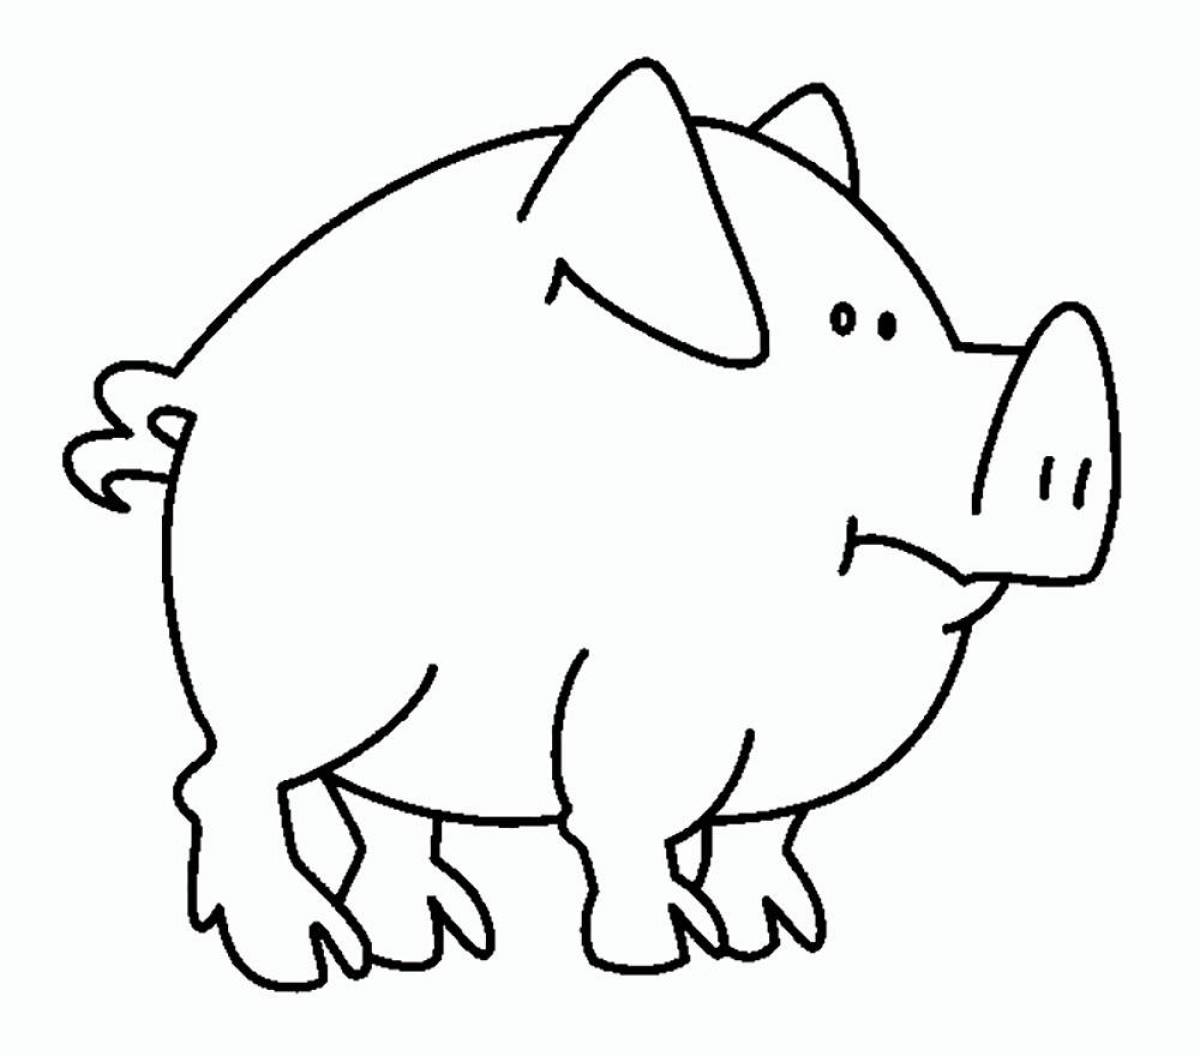 Coloring page mischievous pig